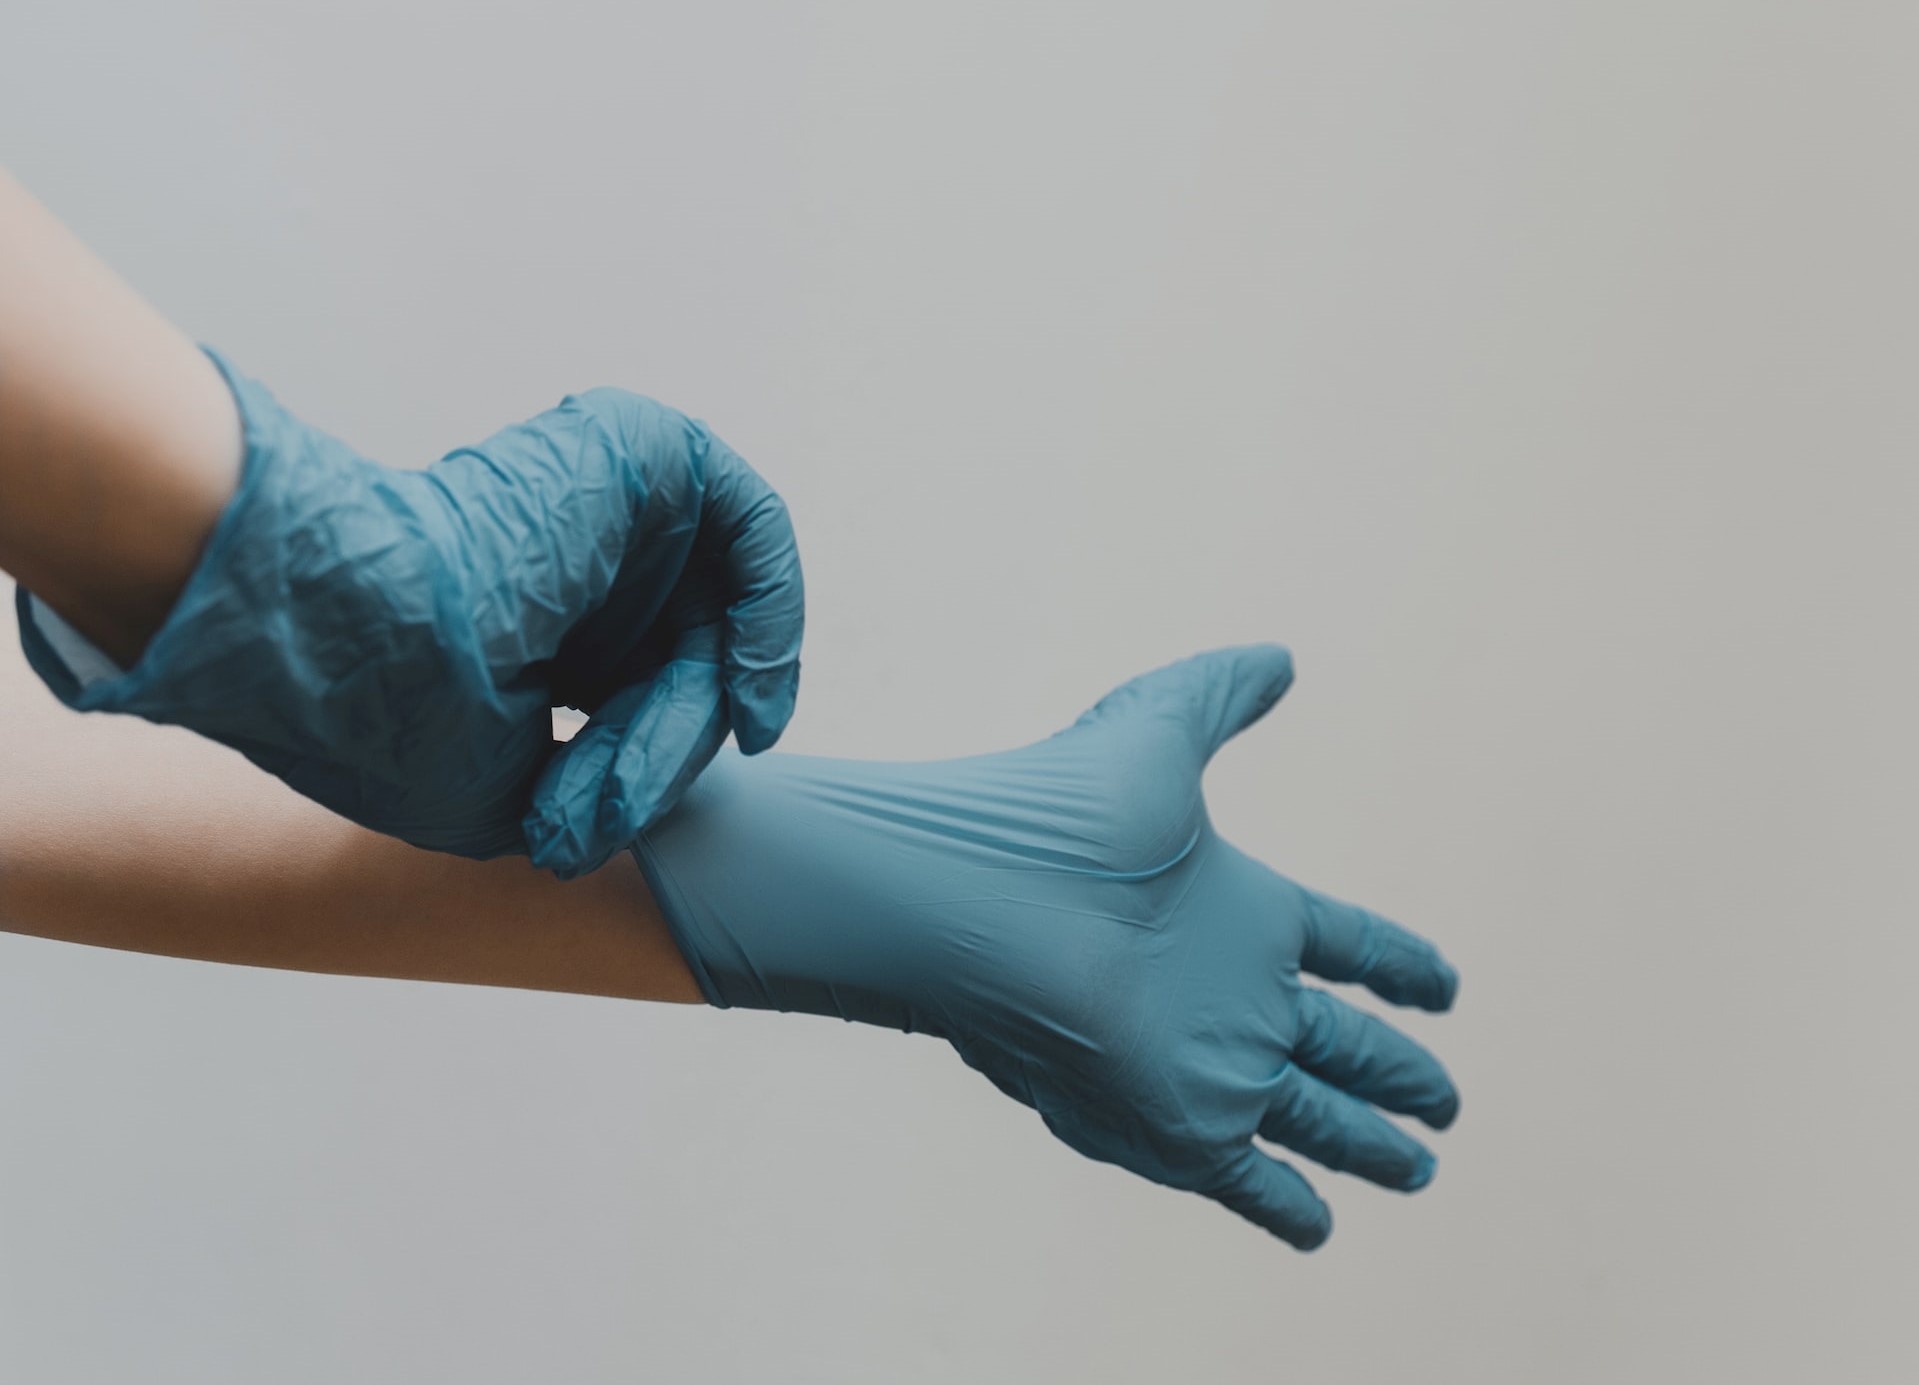 Physician Associate surgical gloves